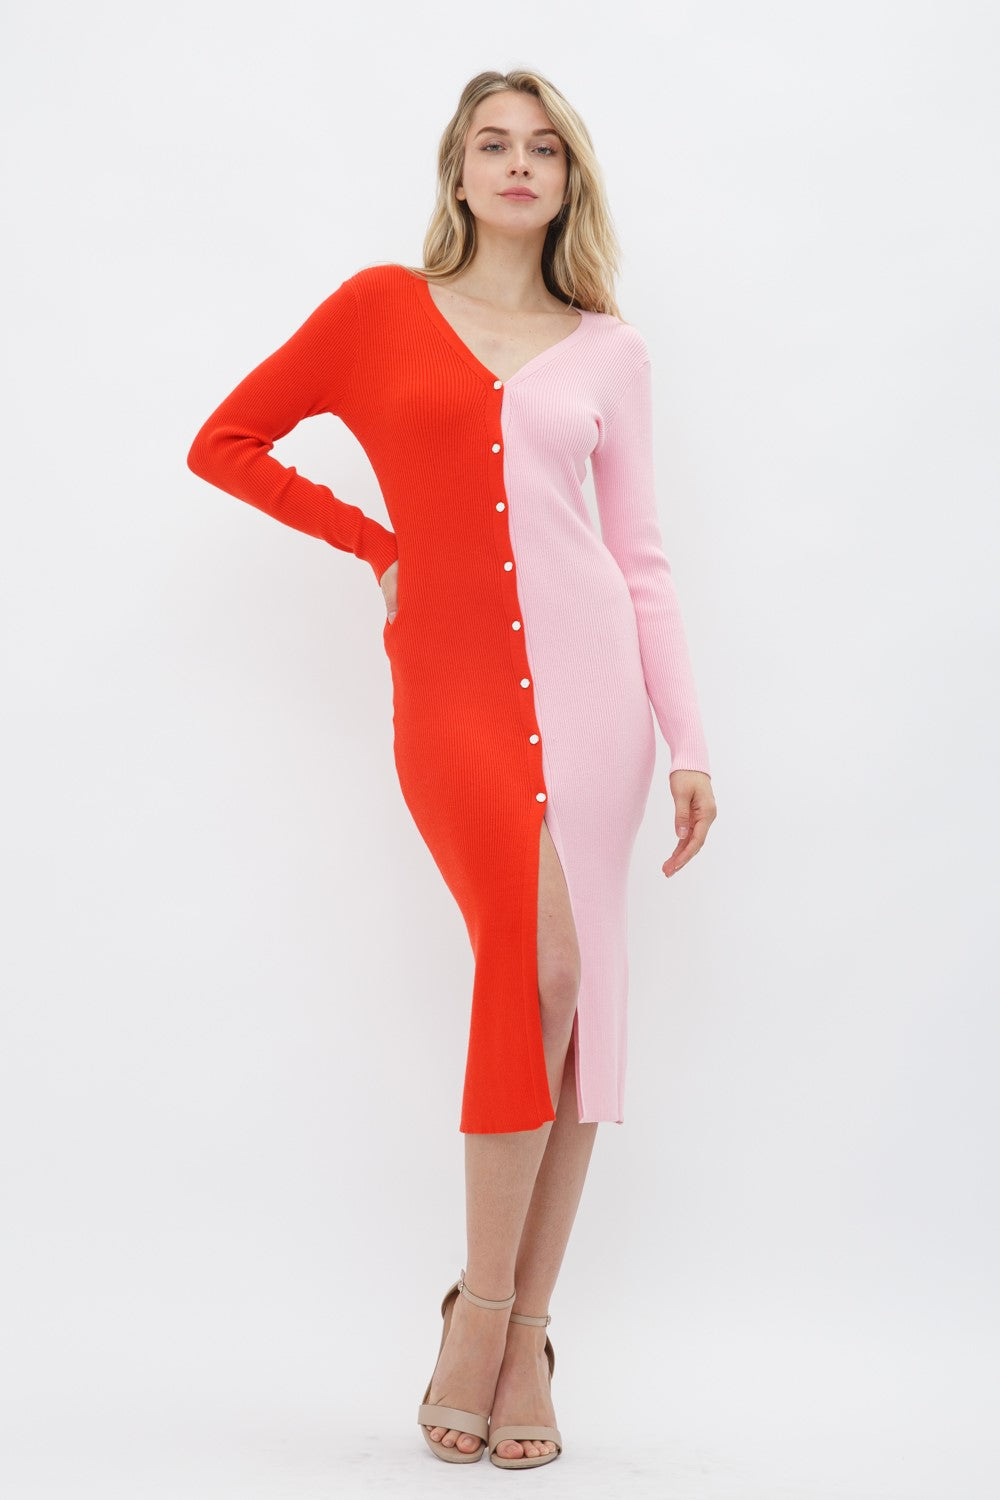 Weezie D Pink Goes Orange Stretch Knit Button Up Dress is ribbed & color blocked for a modern twist to the class sweater dress that will fit your curves perfectly. V-Neckline, long sleeves & white enamel buttons make our dress a more elevated choice. We love style that meets comfort 50% Viscos 28% Polyester 22% Nylon